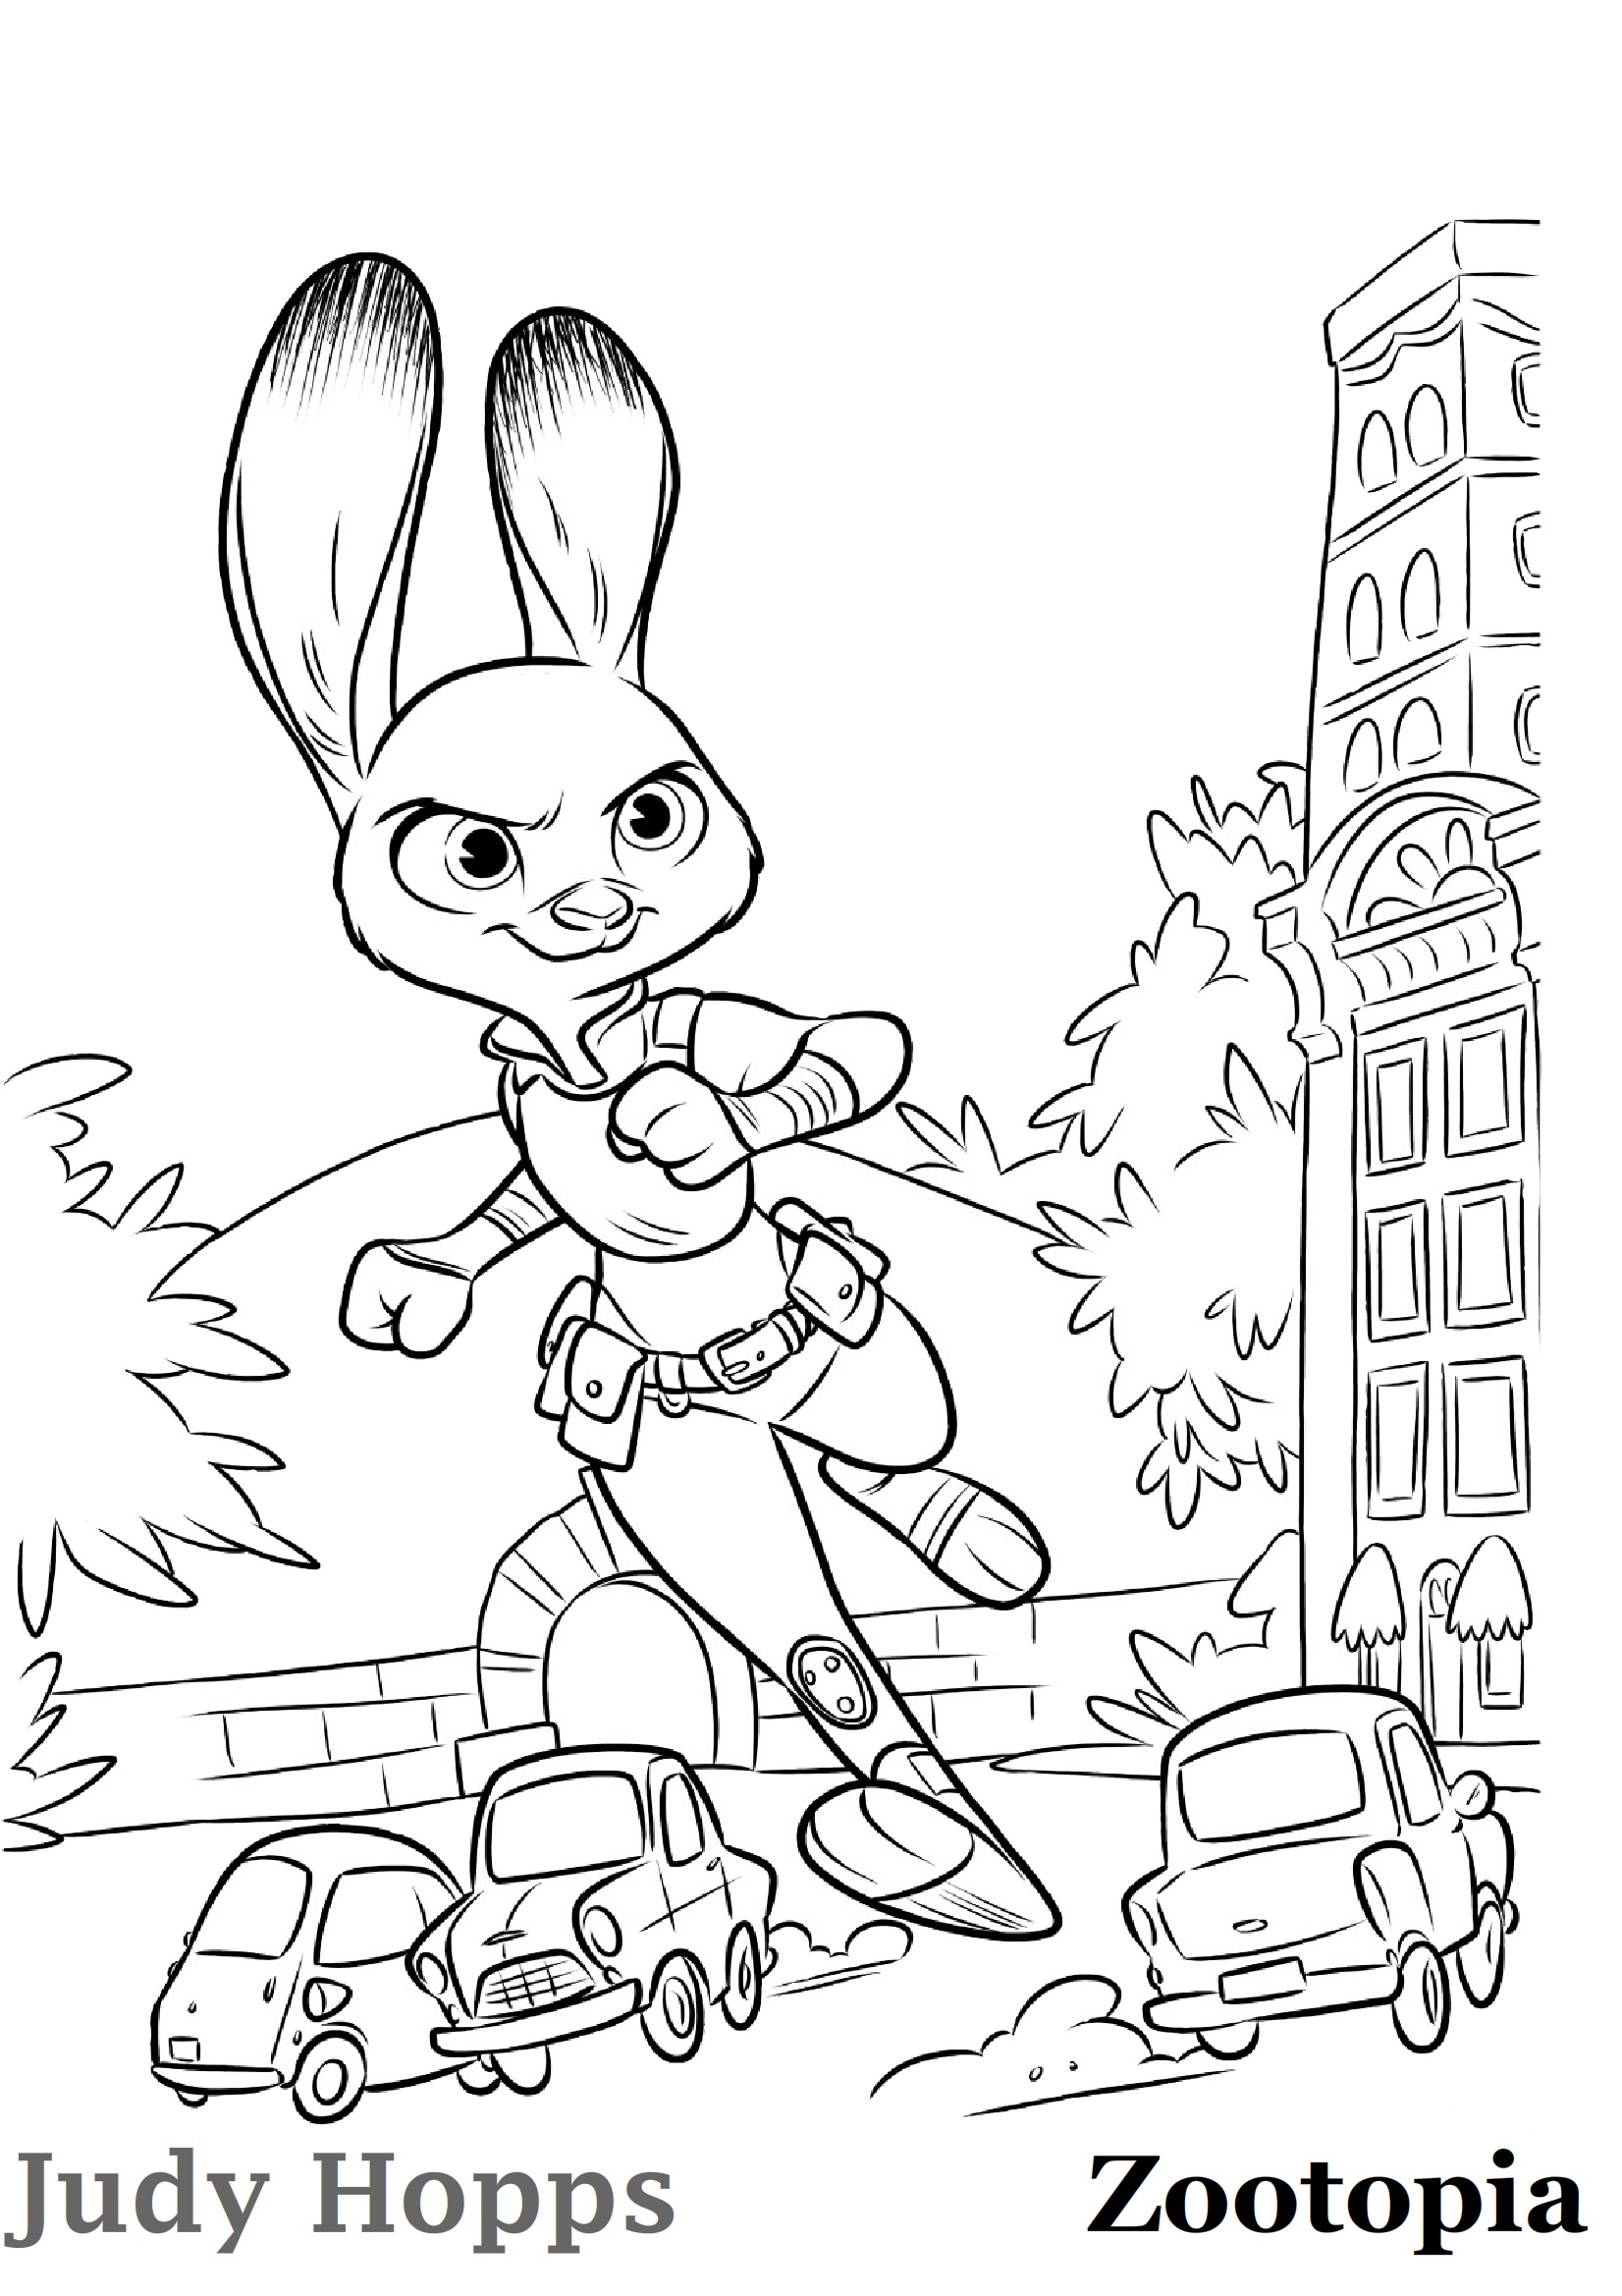 Judy Hopps Zootpia Coloring Page Judy Chasing Theif